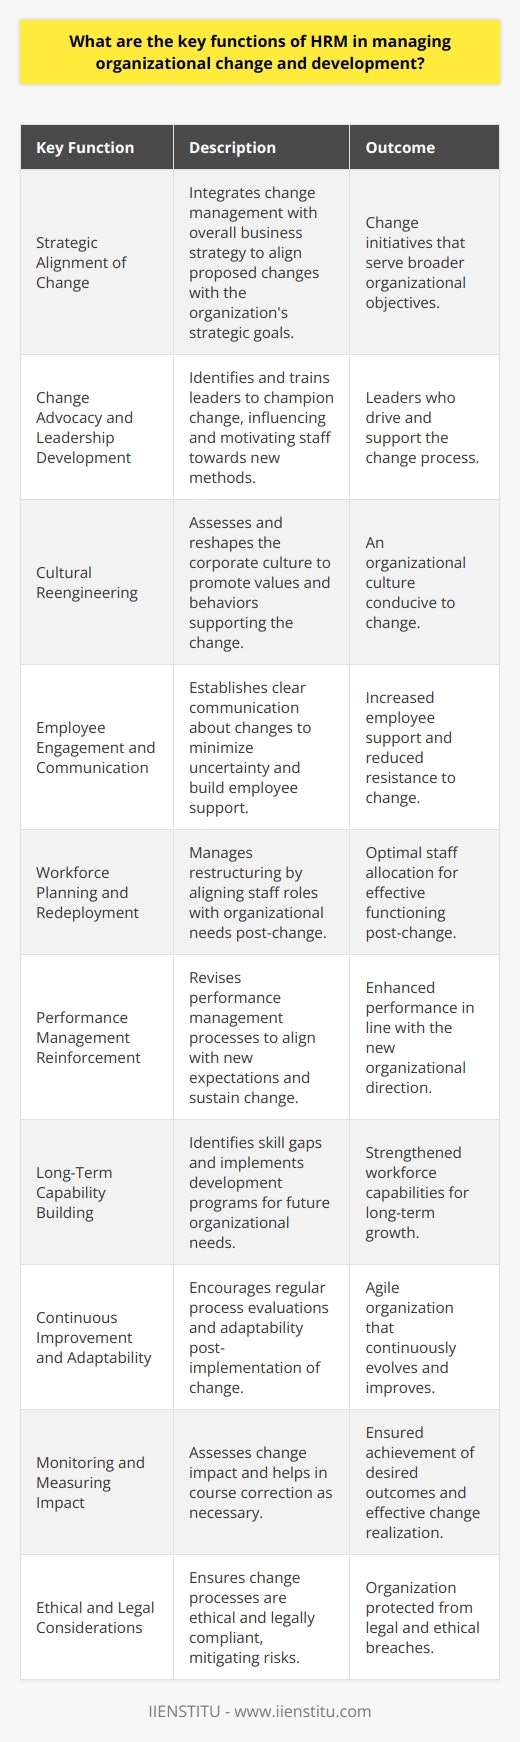 The role of Human Resource Management (HRM) is critical when dealing with organizational change and development. Change is an inevitable aspect of any dynamic organization, and managing it effectively can be the difference between success and failure. HRM's key functions in this process are:1. **Strategic Alignment of Change**: HRM ensures that any proposed change aligns with the organization's strategic goals. By doing so, HRM integrates change management with the overall business strategy, ensuring that all changes serve the broader objectives of the organization.2. **Change Advocacy and Leadership Development**: HRM encourages change advocates within the organization, which may involve identifying and training leaders to champion the change. These leaders can help in influencing and motivating others to adopt new methods and approaches.3. **Cultural Reengineering**: Often, change requires a shift in the corporate culture. HRM assesses the existing culture and defines what aspects of it need to change to accommodate new ways of working. This could involve promoting new values or behaviors that support the change.4. **Employee Engagement and Communication**: HRM establishes clear lines of communication to explain the change process to employees. Transparent communication minimizes uncertainty and can help in garnering employee support, which is essential for successful change implementation.5. **Workforce Planning and Redeployment**: If change involves restructuring, HRM handles the sensitive task of workforce planning, including potential layoffs, redeployments, or reassignments of staff to ensure that the right people are in the right roles.6. **Performance Management Reinforcement**: After changes are implemented, HRM may revise performance management processes to reinforce the new expectations and ensure sustained change. This might include setting new performance metrics, creating incentives for change adoption, or providing constructive feedback.7. **Long-Term Capability Building**: HRM focuses on building long-term capabilities within the organization. This often involves identifying skill gaps and implementing development programs to future-proof the organization.8. **Continuous Improvement and Adaptability**: Once the initial change is implemented, HRM doesn't step back. Instead, it encourages a culture of continuous improvement where processes are regularly evaluated and adapted based on their effectiveness and feedback from stakeholders.9. **Monitoring and Measuring Impact**: HRM assesses the impact of the change to ensure that the desired outcomes are being achieved. If not, HRM will research why and help course-correct with additional change management interventions.10. **Ethical and Legal Considerations**: HRM navigates the change process mindful of ethical considerations and in compliance with all relevant laws and regulations, thus mitigating risk and protecting the organization from potential legal action or ethical breaches.By mastering these functions, HRM ensures a harmonious transition during periods of change while maintaining operational efficiency or even reaching heightened levels of productivity. Skills and expertise in change management are highly valued in HR professionals, with institutions like IIENSTITU offering specialized courses to develop these competencies in HR personnel.Overall, HRM acts as both the architect and the builder of change within an organization, ensuring that the changes not only take root but also flourish, contributing to the organization’s growth and development.